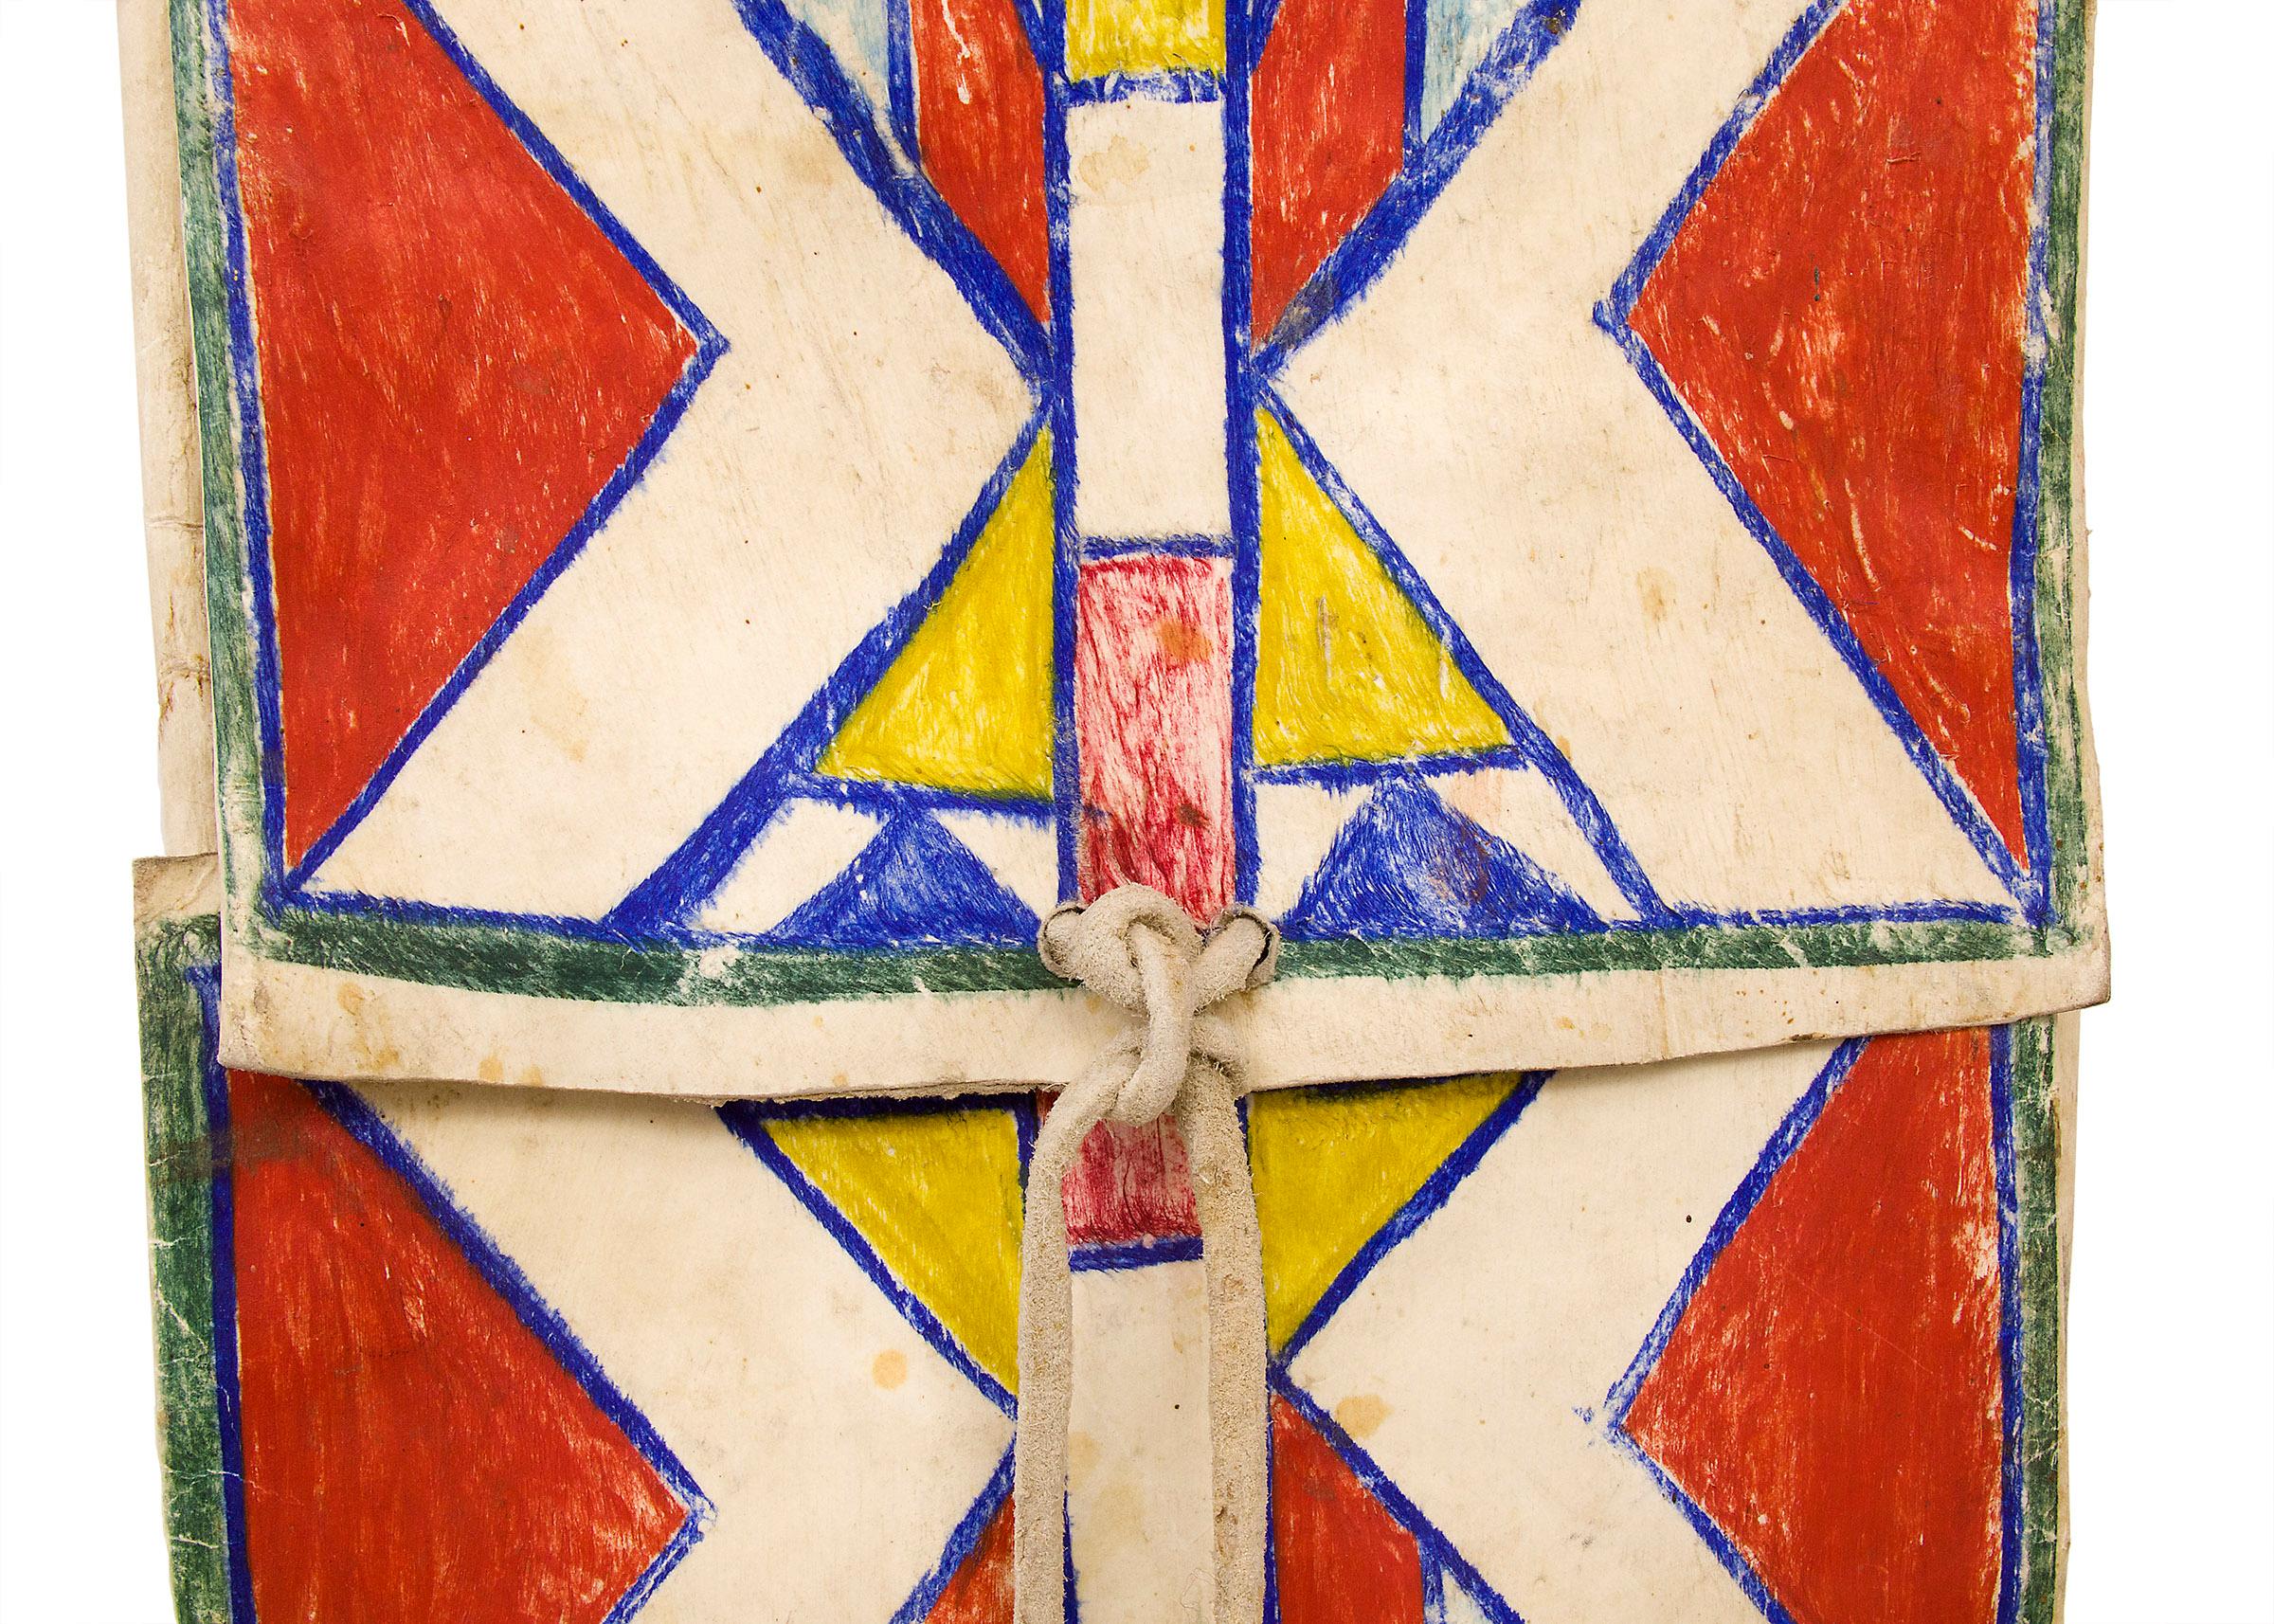 Envelope style parfleche envelope, Crow (Northern Plains), circa 1880. Rawhide with pigments. Painted in abstract/geometric style with double hourglass design in red, blue, green and yellow. Dimensions measure 25 ¼ x 12 x 1 ½ inches.

Very good